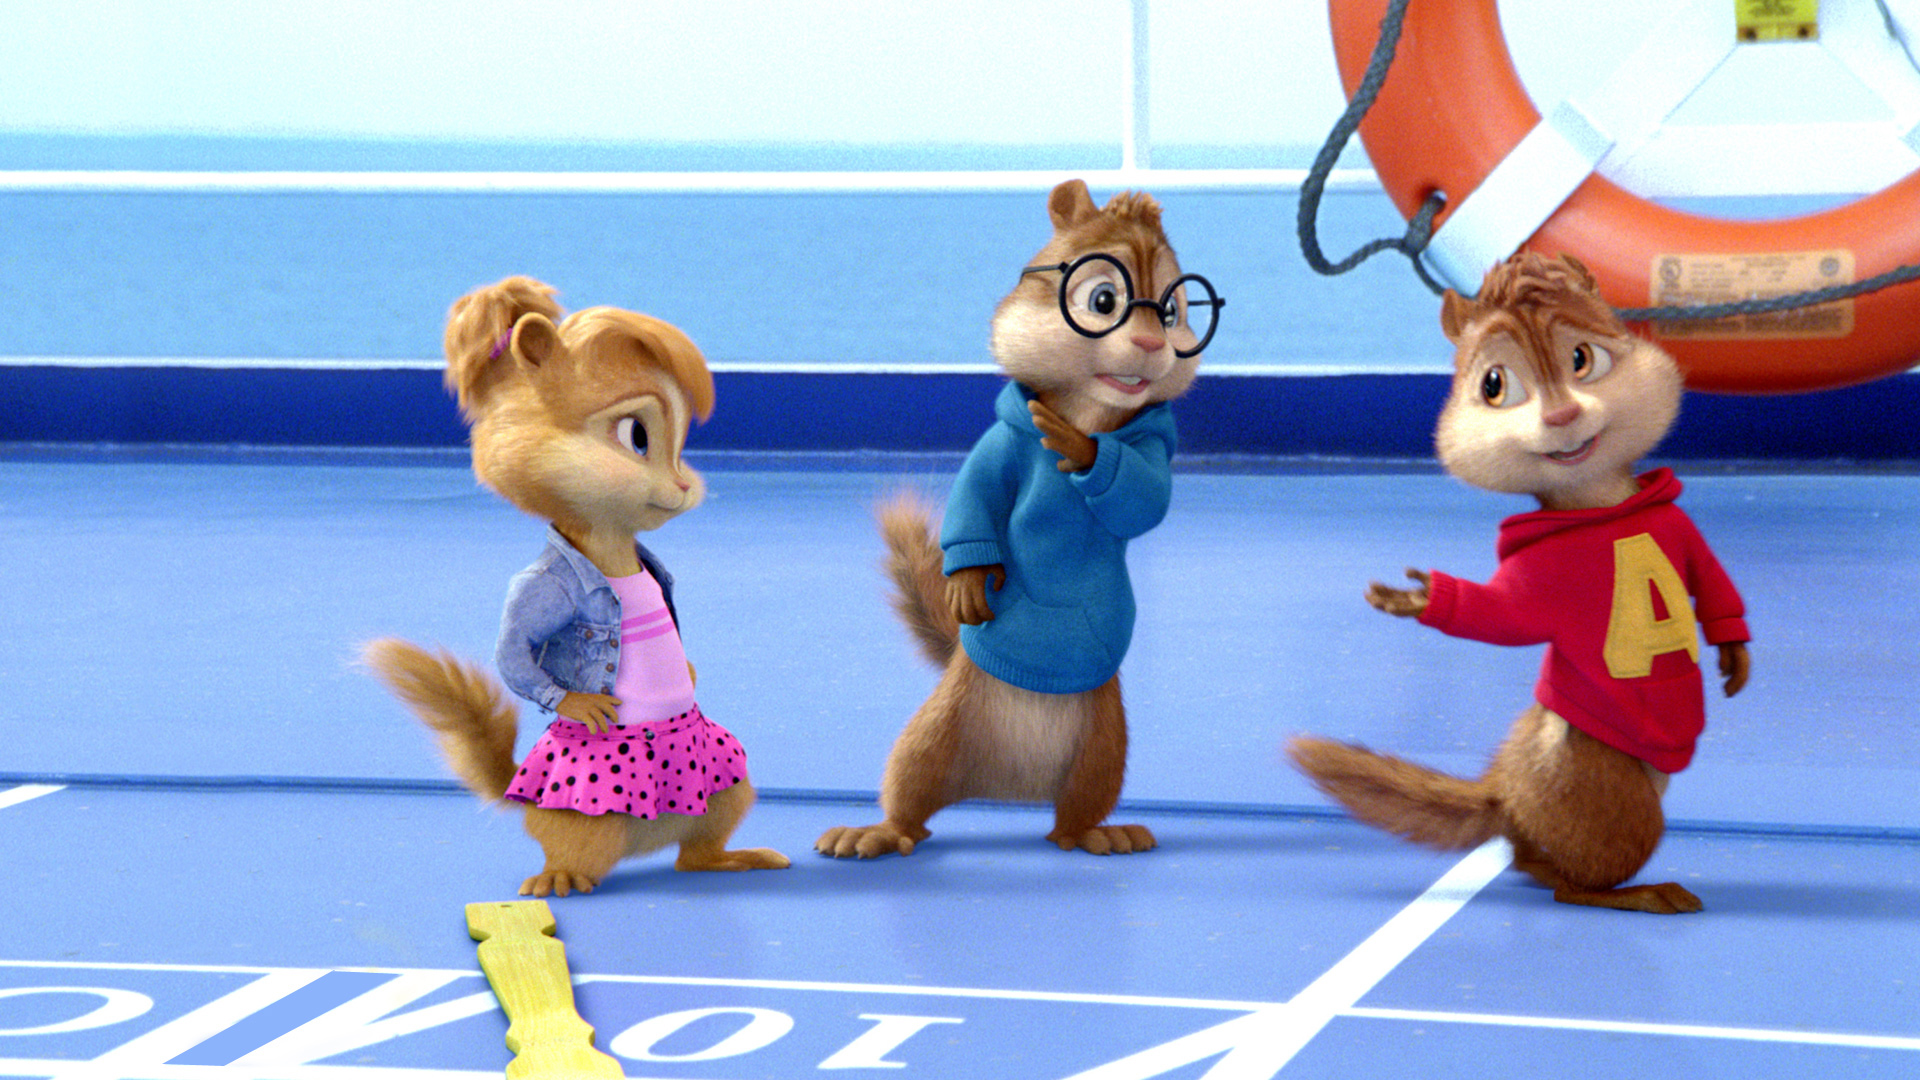 High Resolution Wallpaper | Alvin And The Chipmunks: Chipwrecked 1920x1080 px